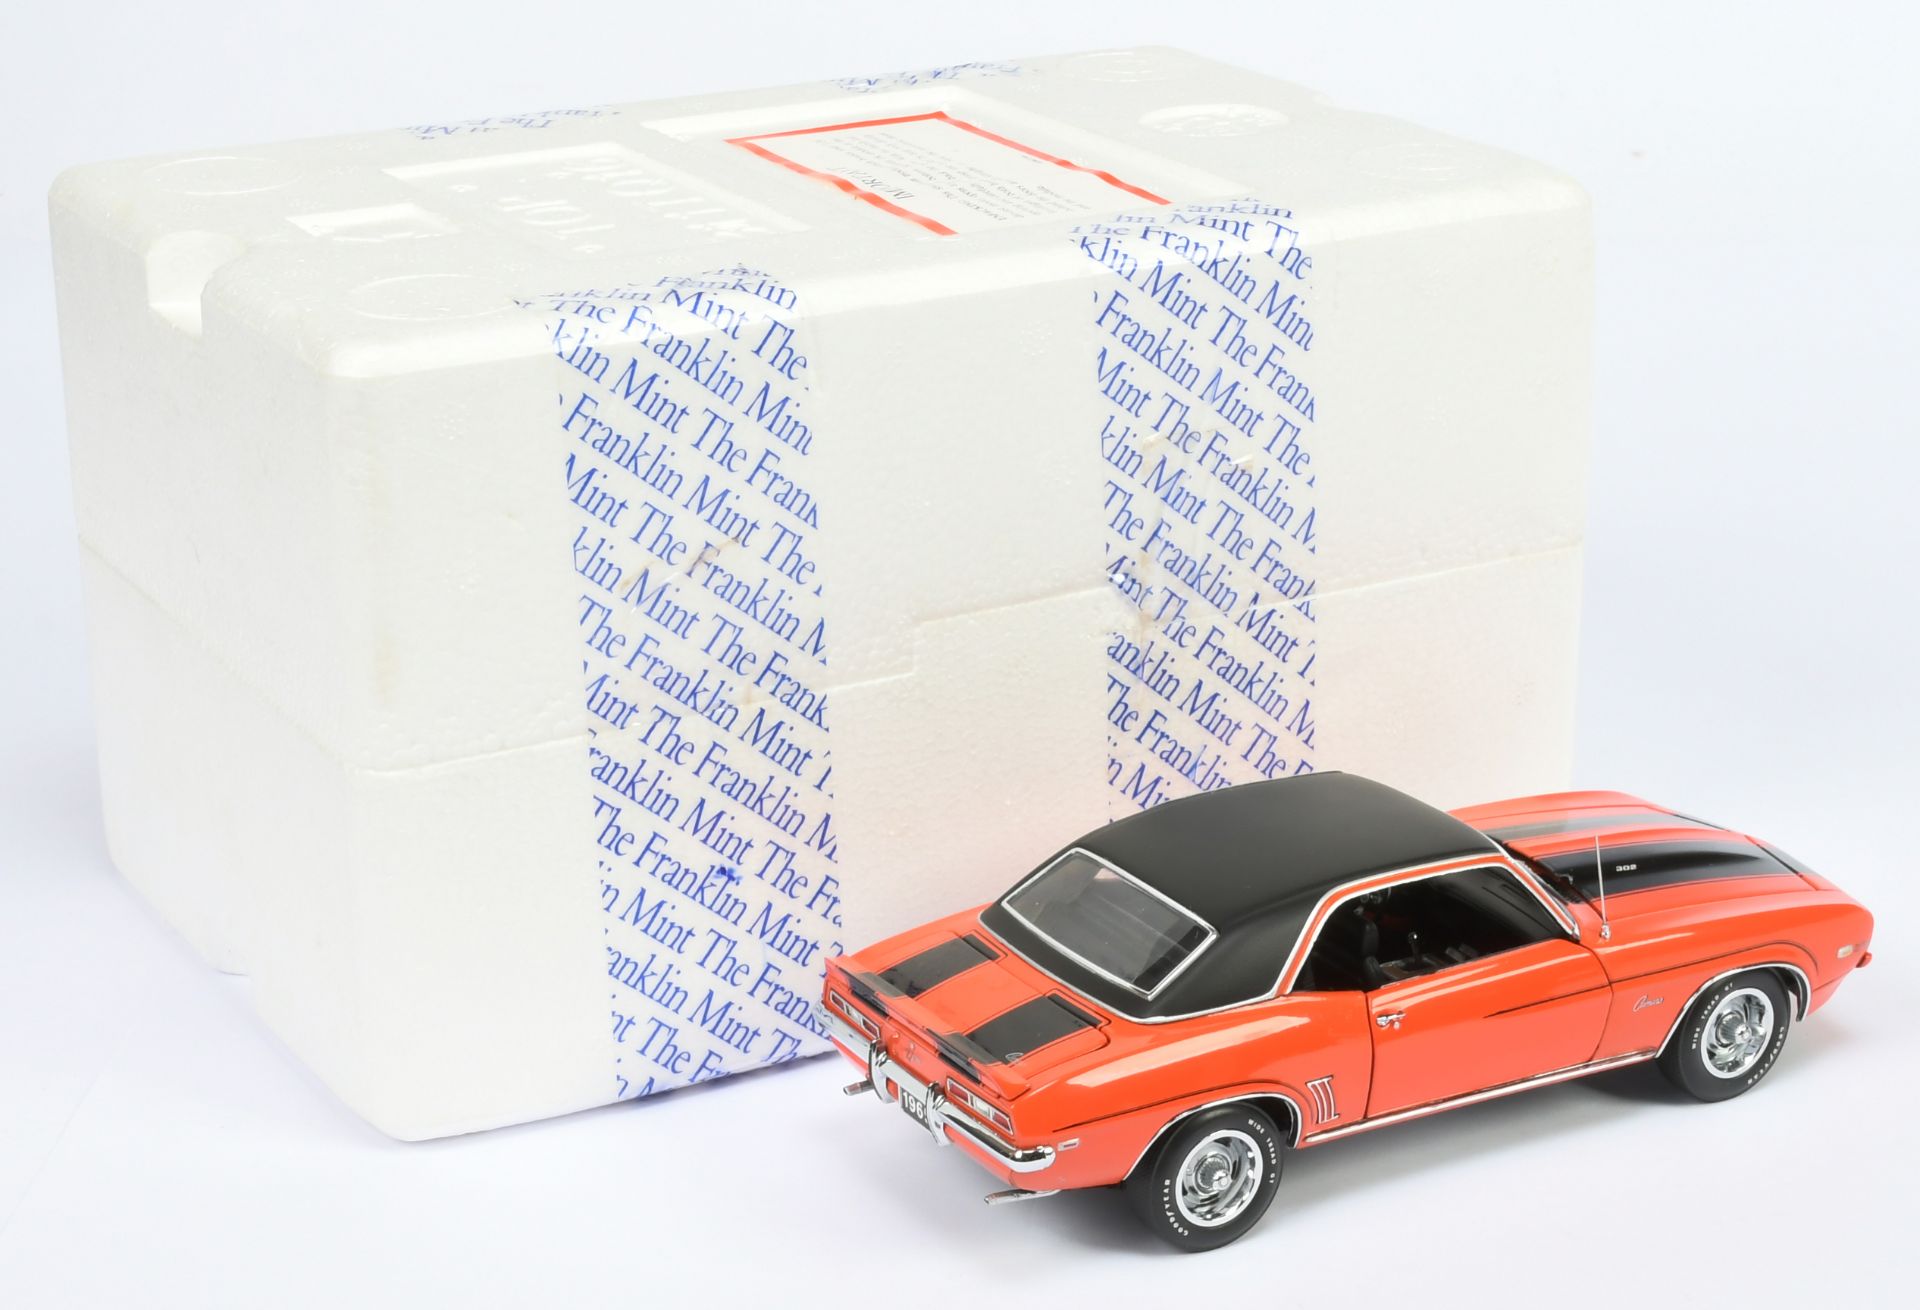 Franklin Mint B11TQ16 1/24th scale 1969 Chevrolet Camaro with FM Paperwork - Near Mint to Mint in... - Image 2 of 2